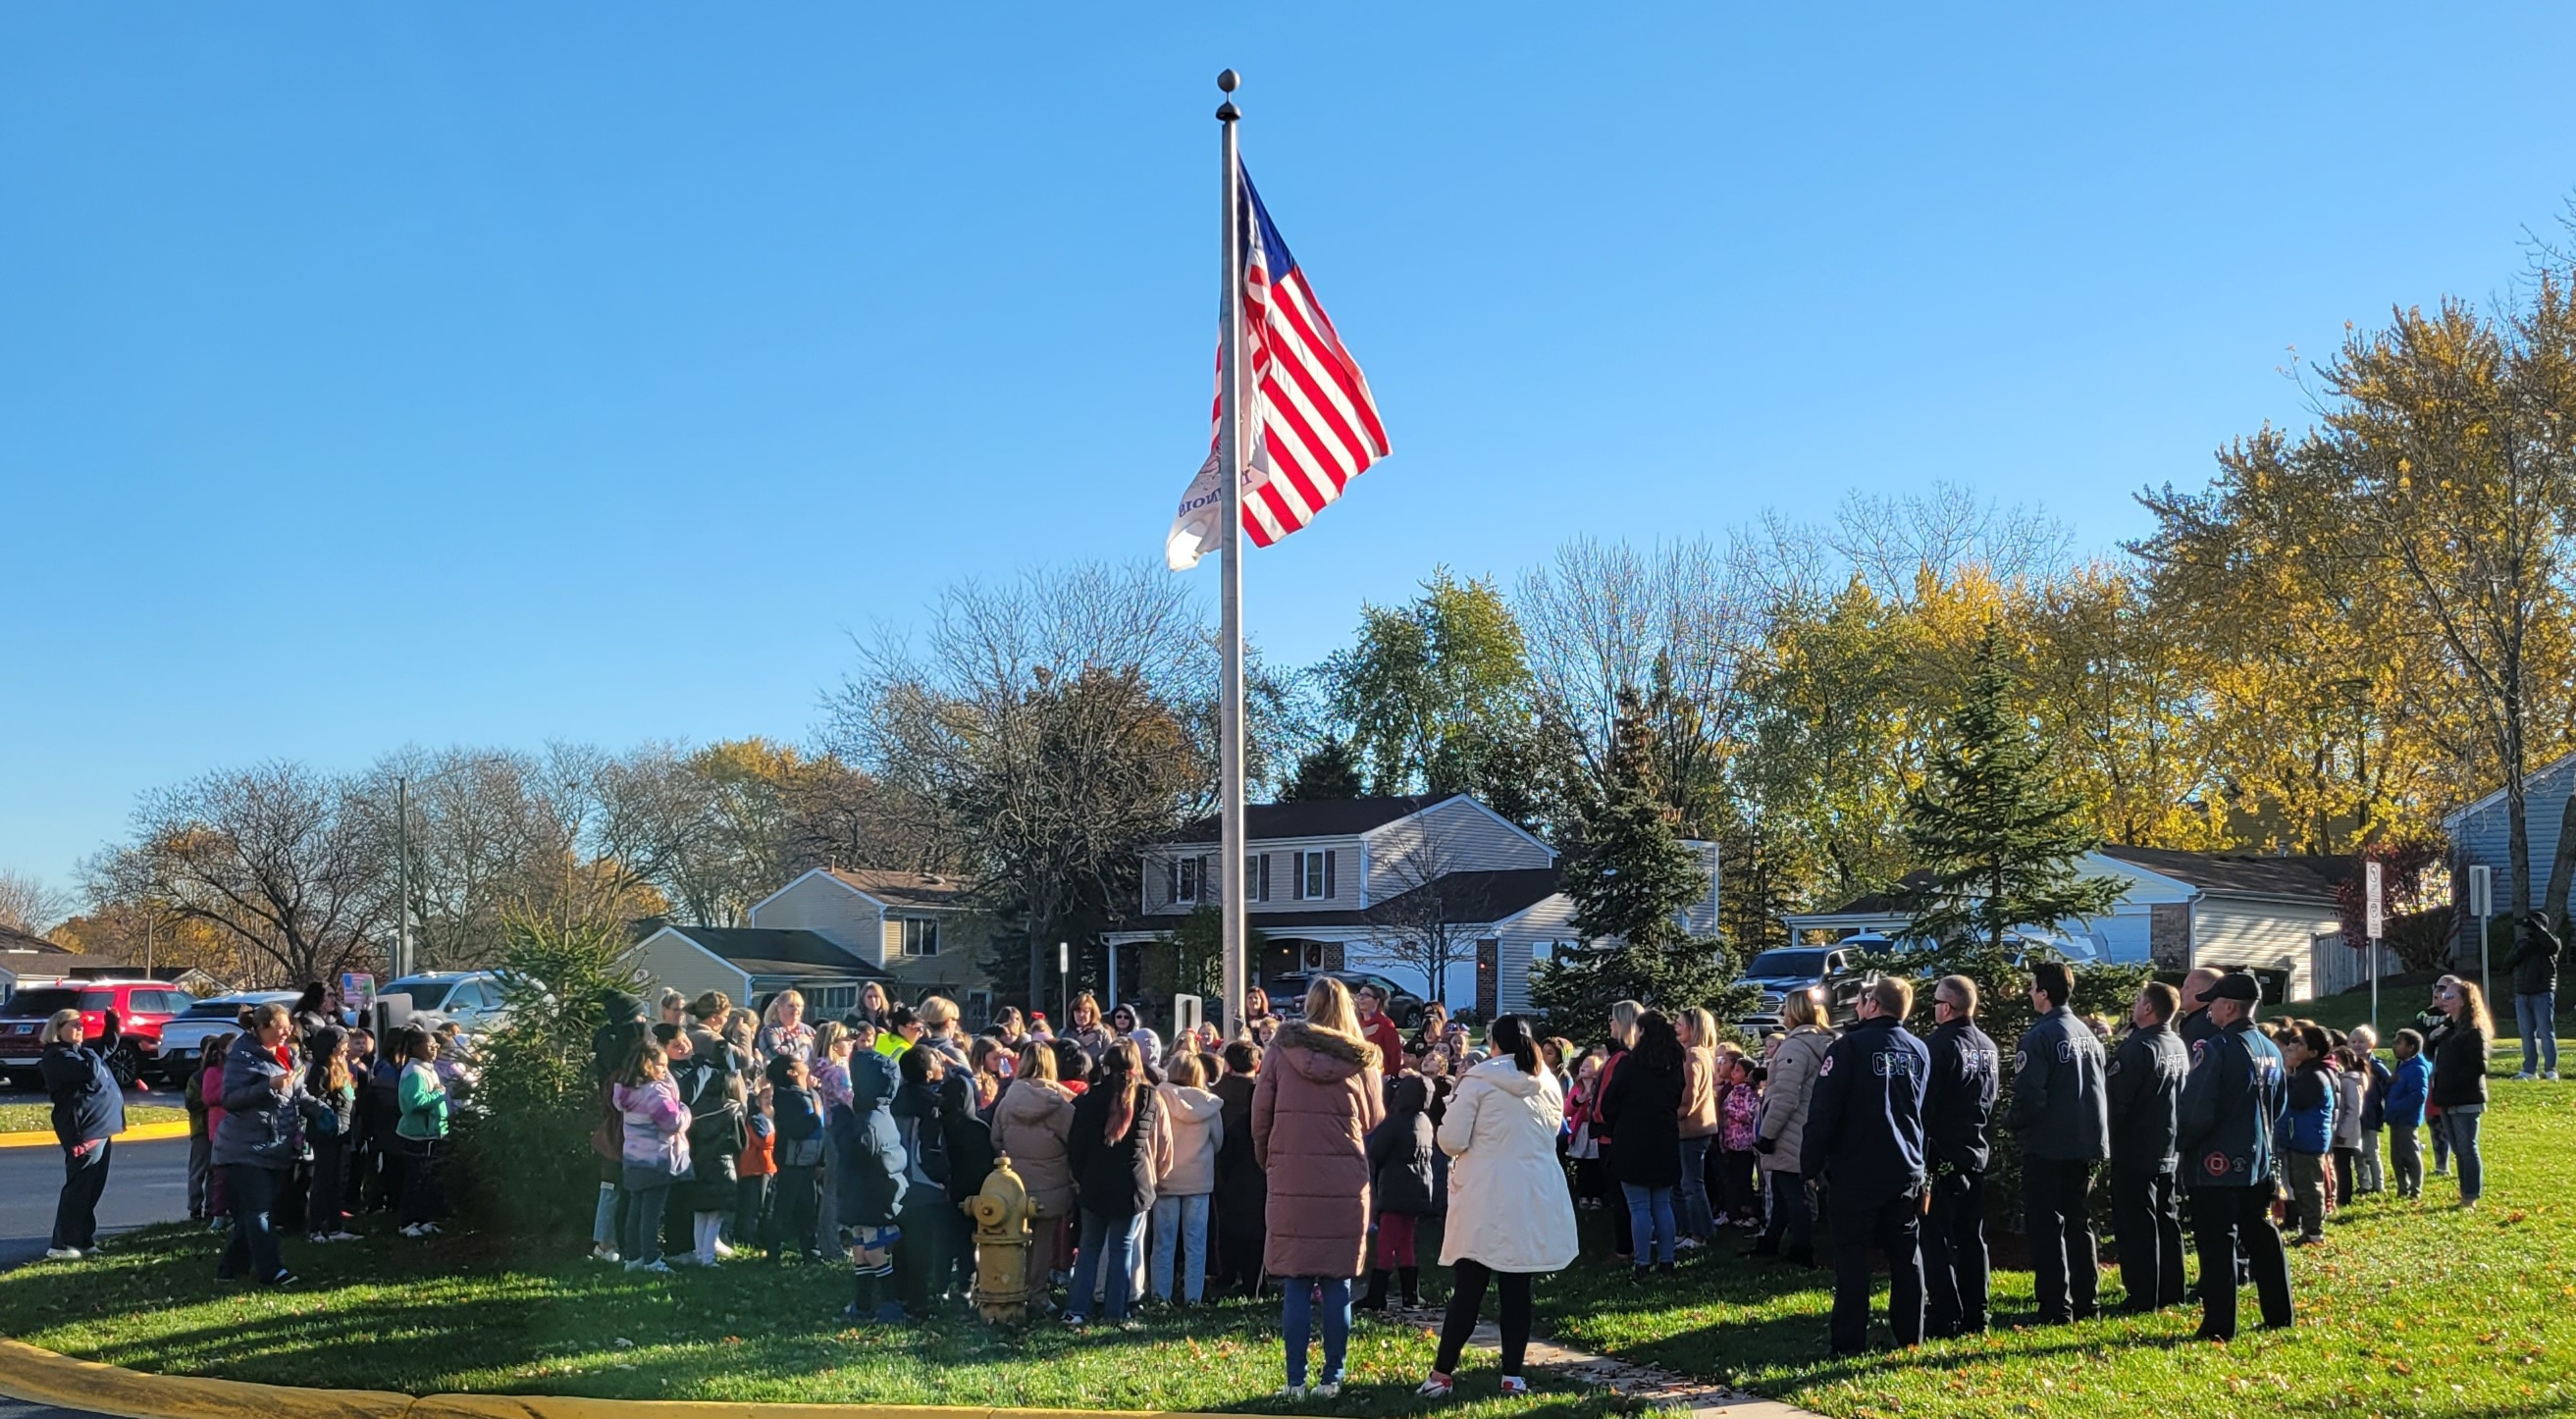 A large group of students and adults standing around a flag pole